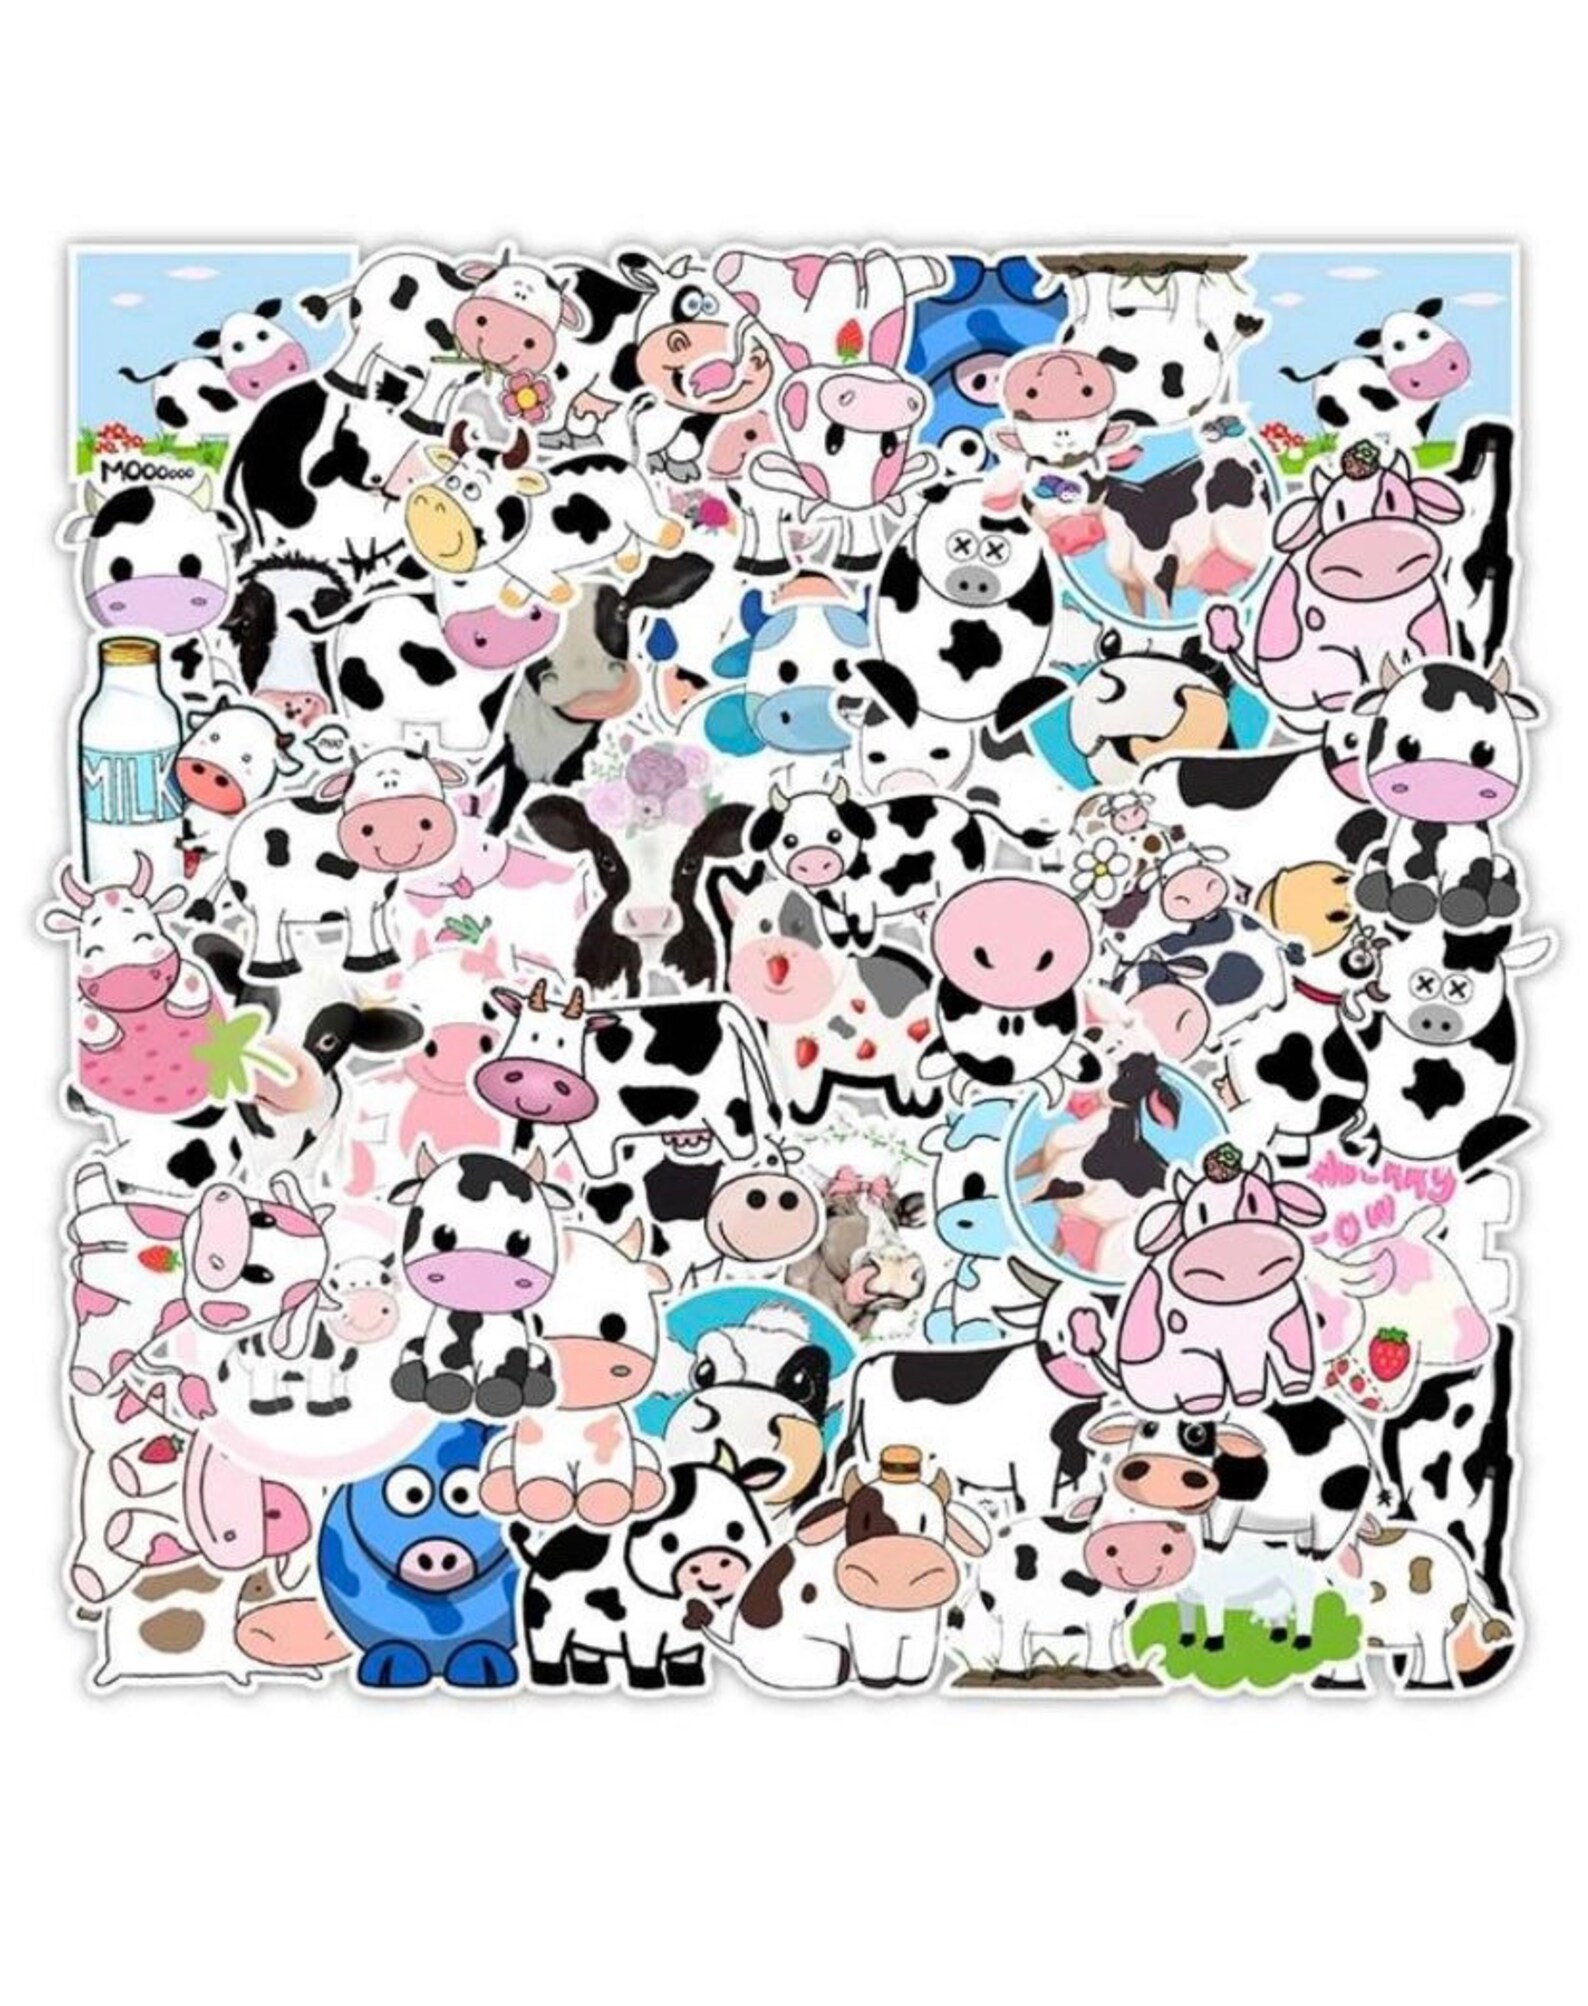 Cow stickers | Etsy